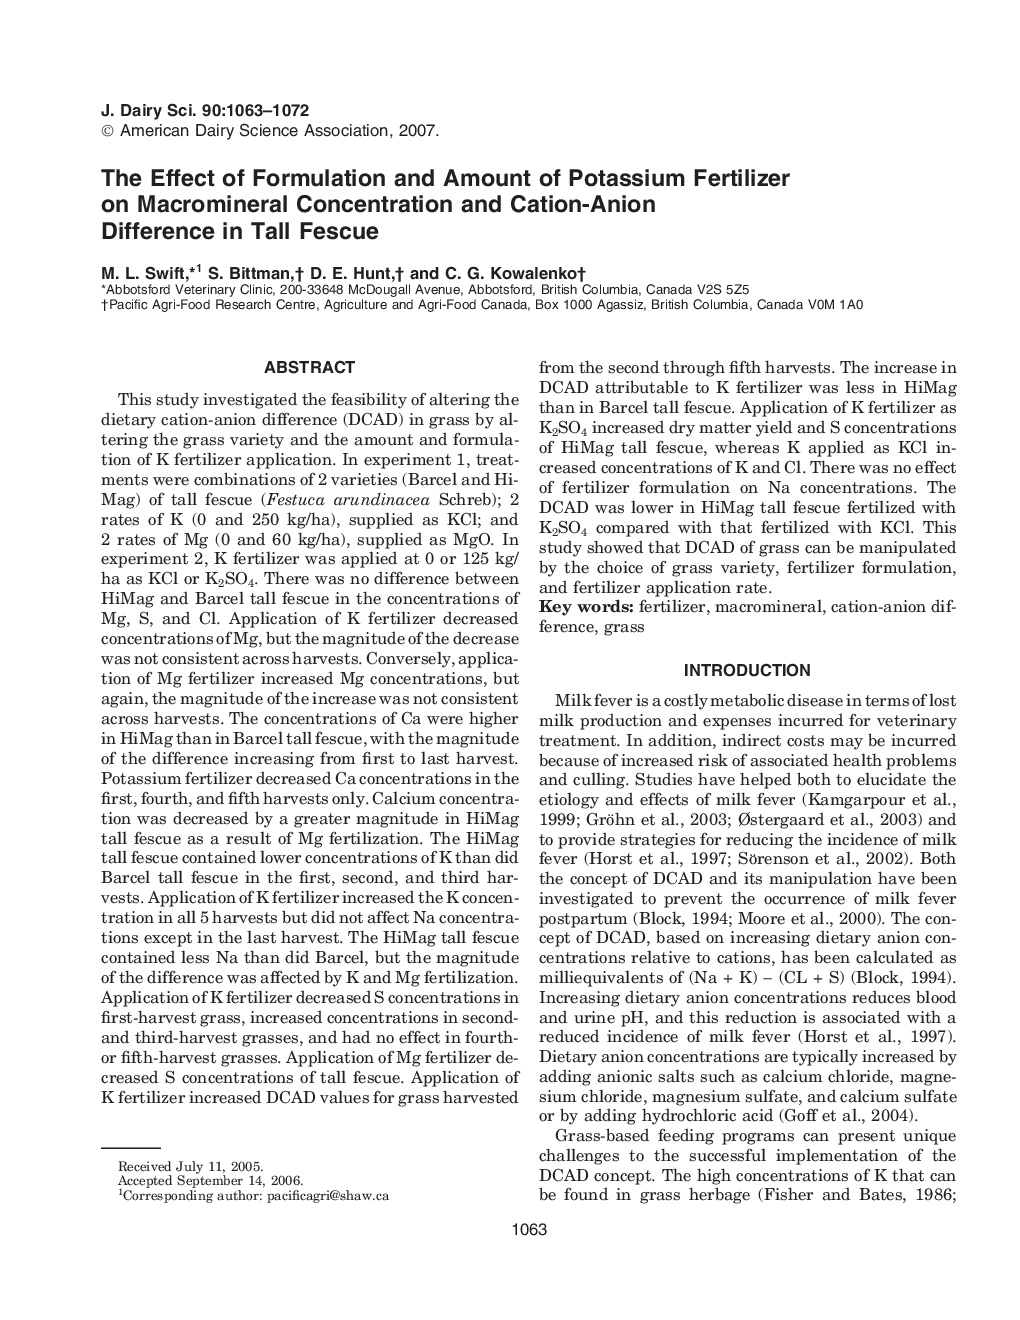 The Effect of Formulation and Amount of Potassium Fertilizer on Macromineral Concentration and Cation-Anion Difference in Tall Fescue